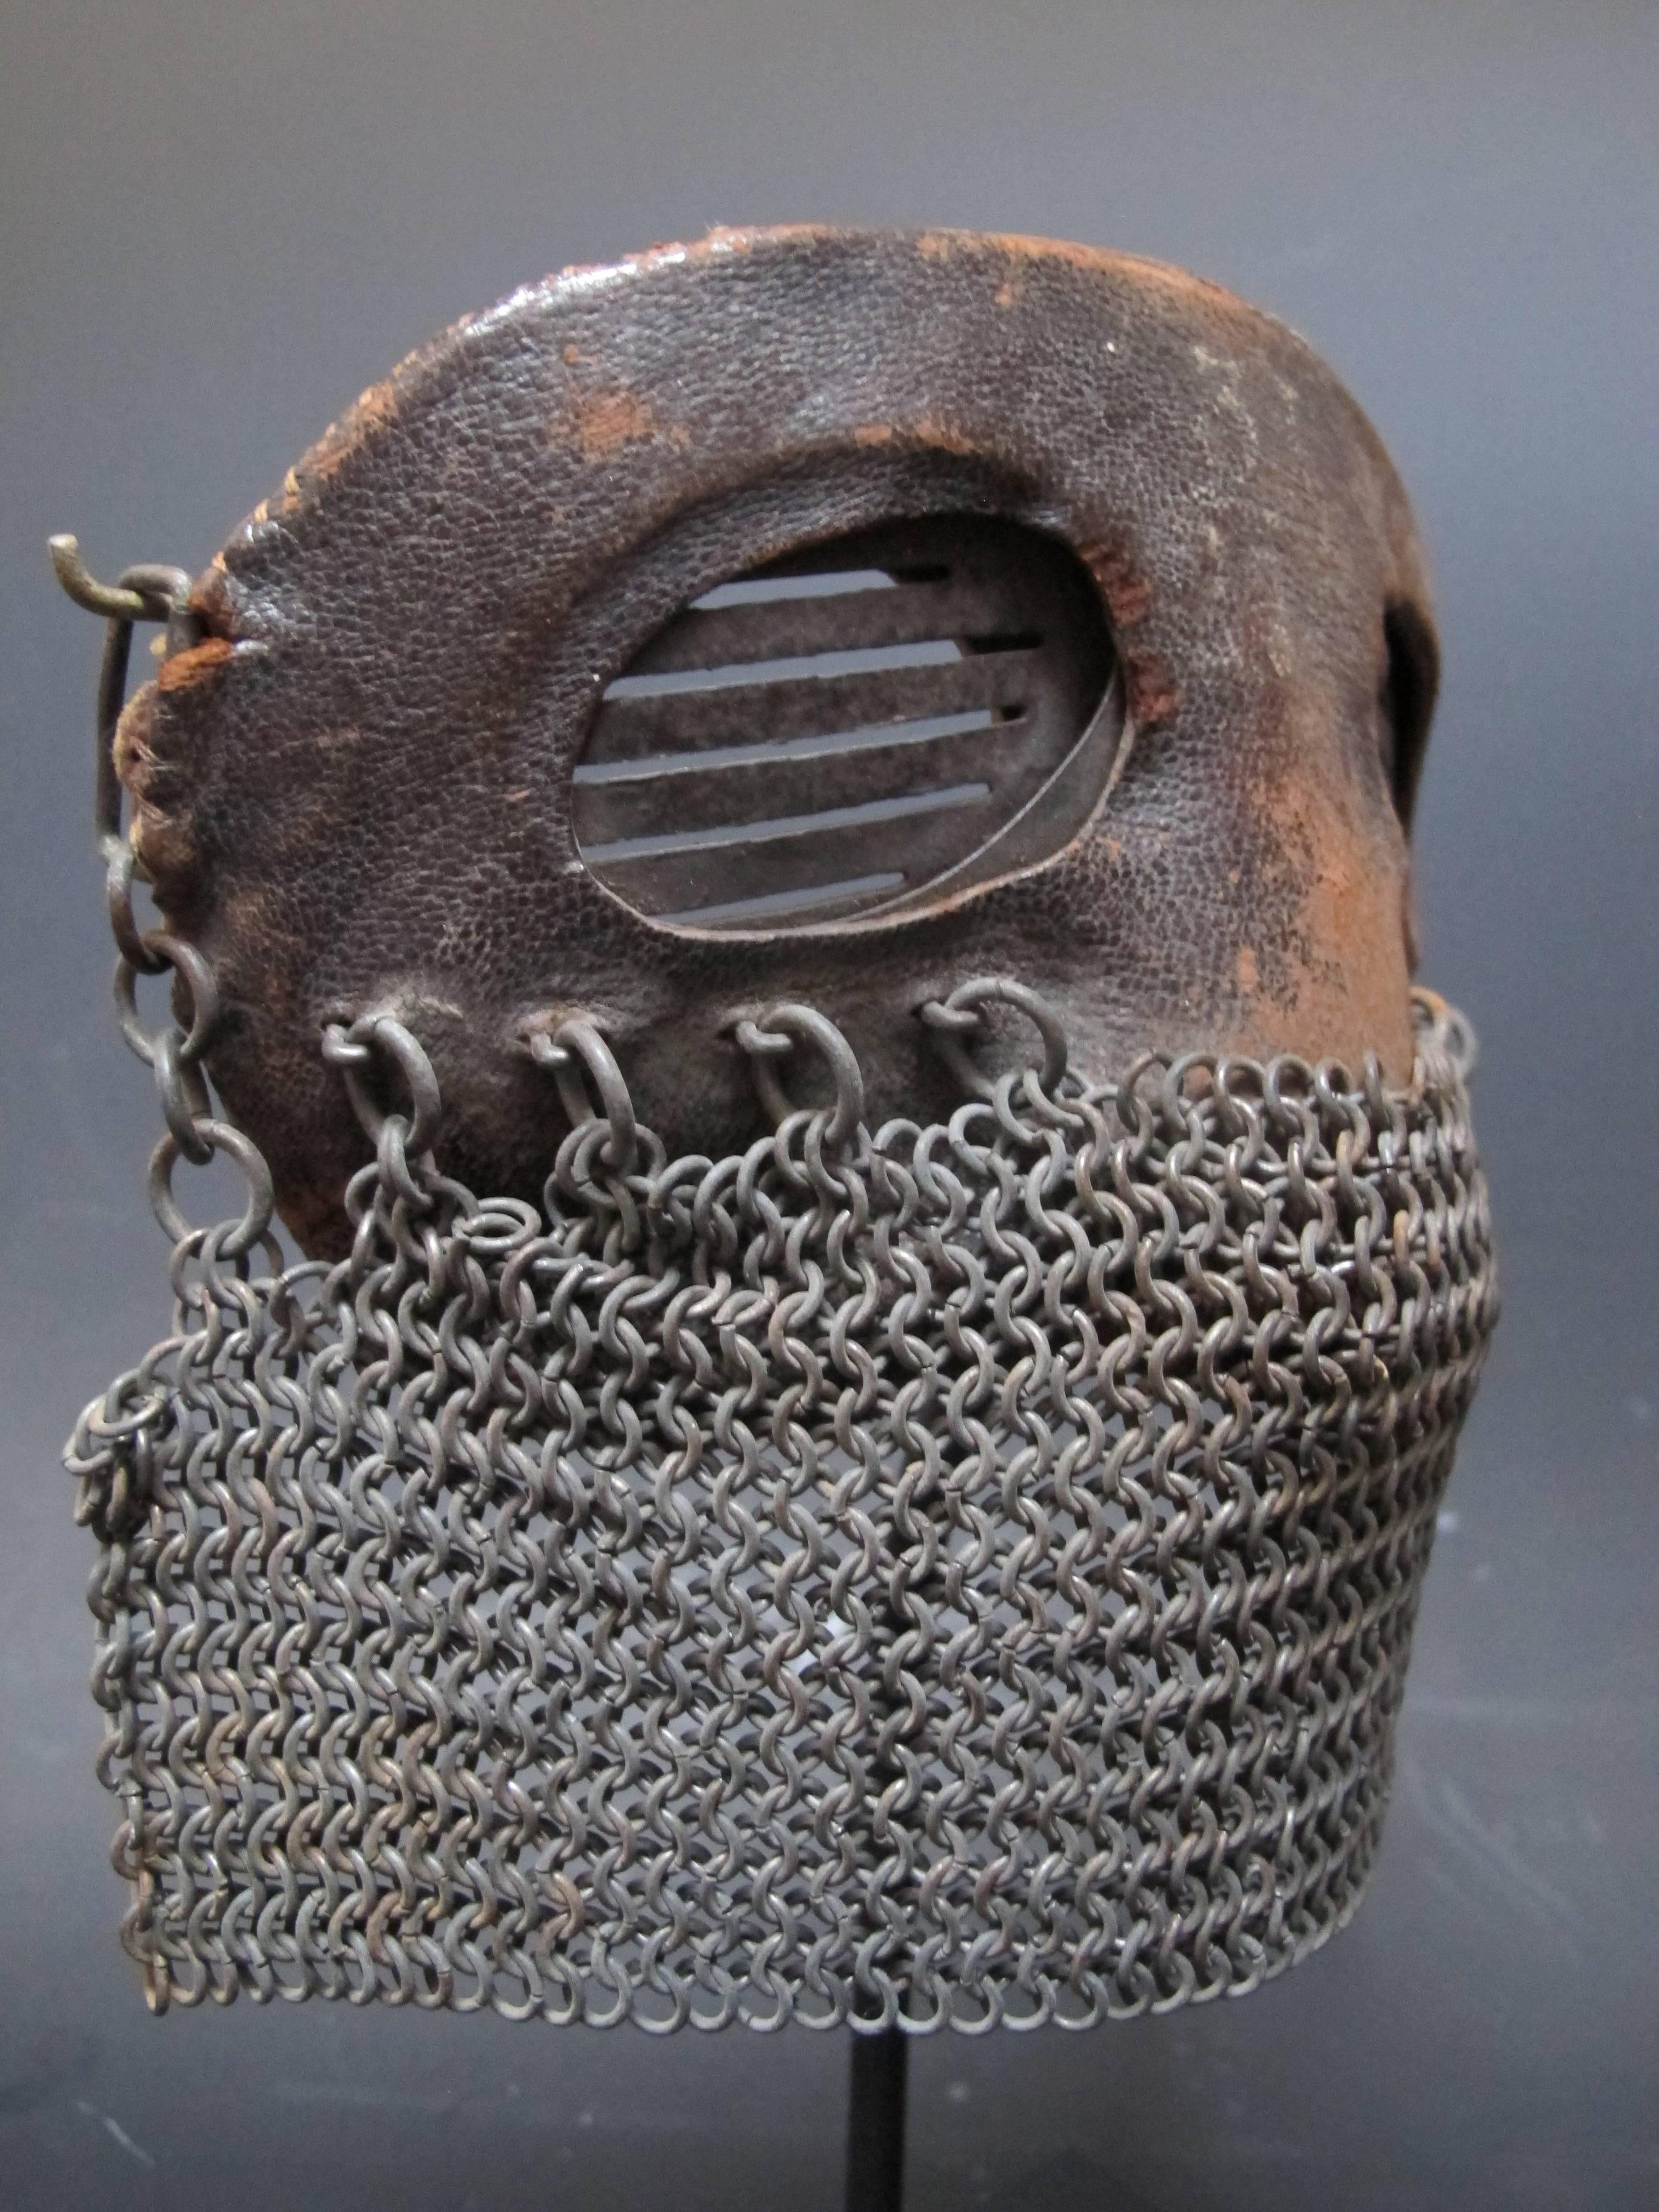 Metalwork Tank Operators Mask from WWI of Iron Leather and Chain Mail